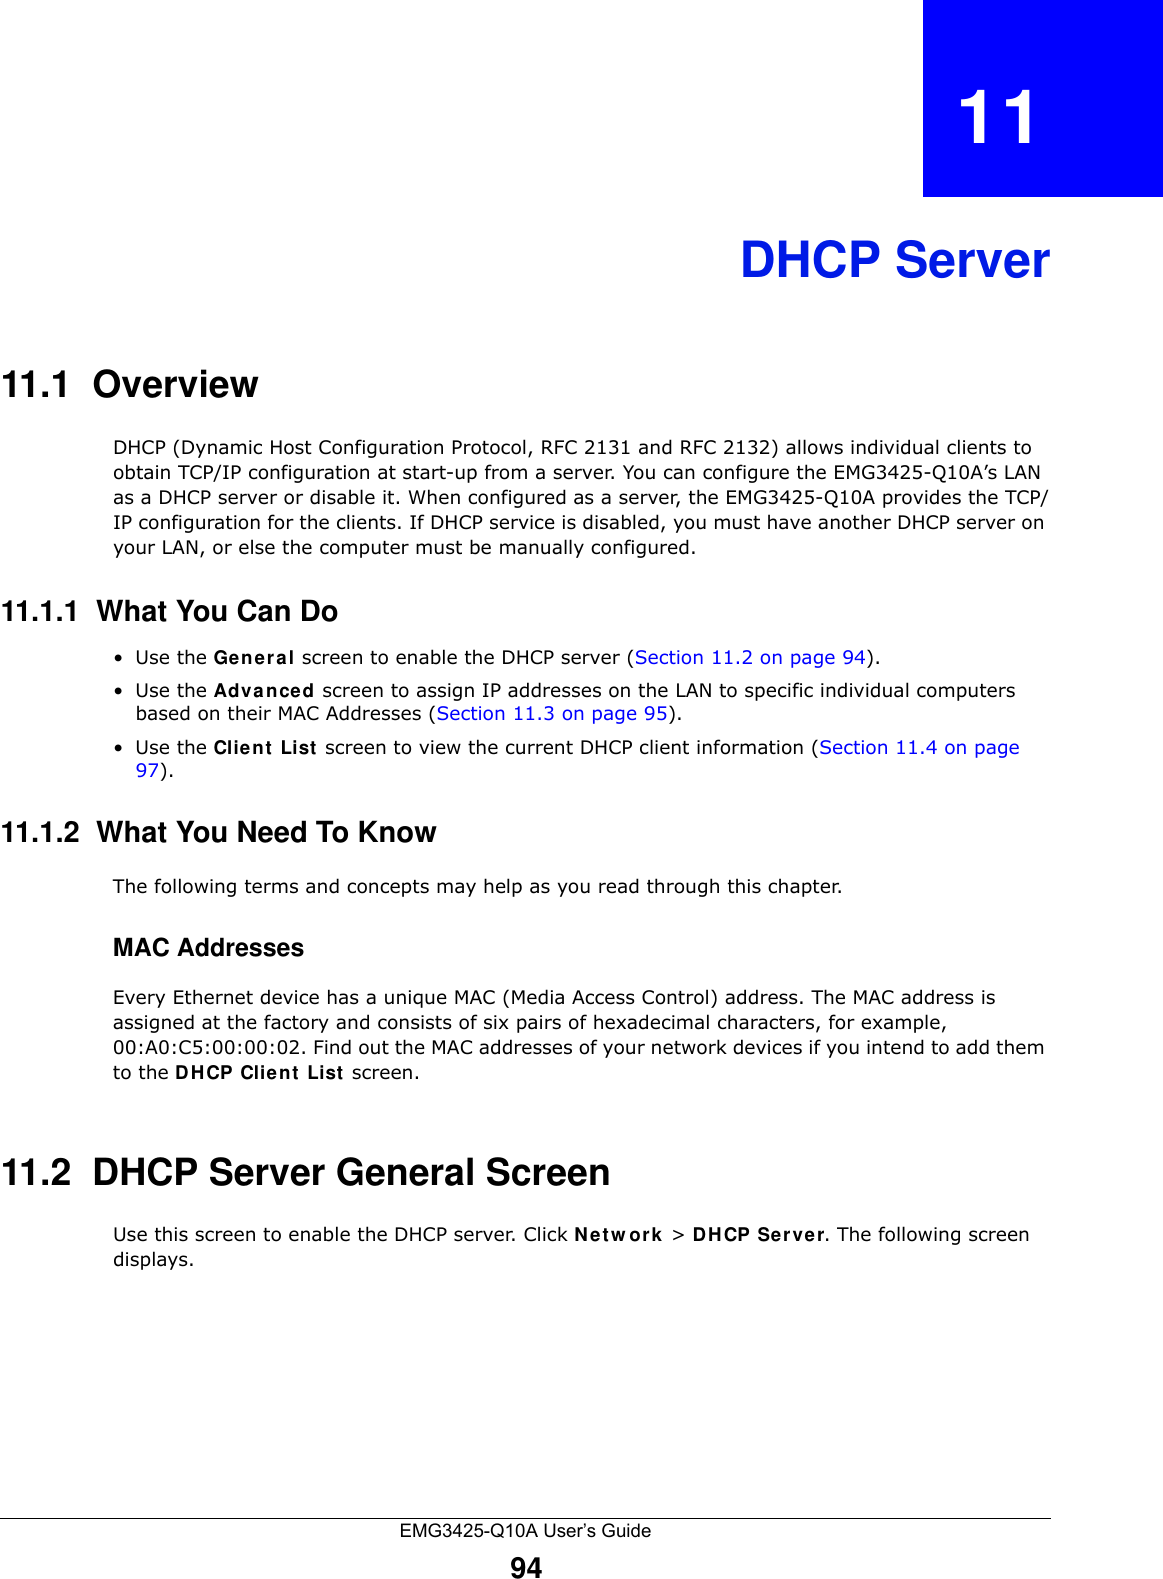 EMG3425-Q10A User’s Guide94CHAPTER   11DHCP Server11.1  OverviewDHCP (Dynamic Host Configuration Protocol, RFC 2131 and RFC 2132) allows individual clients to obtain TCP/IP configuration at start-up from a server. You can configure the EMG3425-Q10A’s LAN as a DHCP server or disable it. When configured as a server, the EMG3425-Q10A provides the TCP/IP configuration for the clients. If DHCP service is disabled, you must have another DHCP server on your LAN, or else the computer must be manually configured.11.1.1  What You Can Do•Use the Ge n e r a l screen to enable the DHCP server (Section 11.2 on page 94).•Use the Adva nced screen to assign IP addresses on the LAN to specific individual computers based on their MAC Addresses (Section 11.3 on page 95).•Use the Clie n t  List  screen to view the current DHCP client information (Section 11.4 on page 97). 11.1.2  What You Need To KnowThe following terms and concepts may help as you read through this chapter.MAC AddressesEvery Ethernet device has a unique MAC (Media Access Control) address. The MAC address is assigned at the factory and consists of six pairs of hexadecimal characters, for example, 00:A0:C5:00:00:02. Find out the MAC addresses of your network devices if you intend to add them to the DH CP Client List screen.11.2  DHCP Server General ScreenUse this screen to enable the DHCP server. Click N e t w o rk &gt; DHCP Ser ver. The following screen displays.